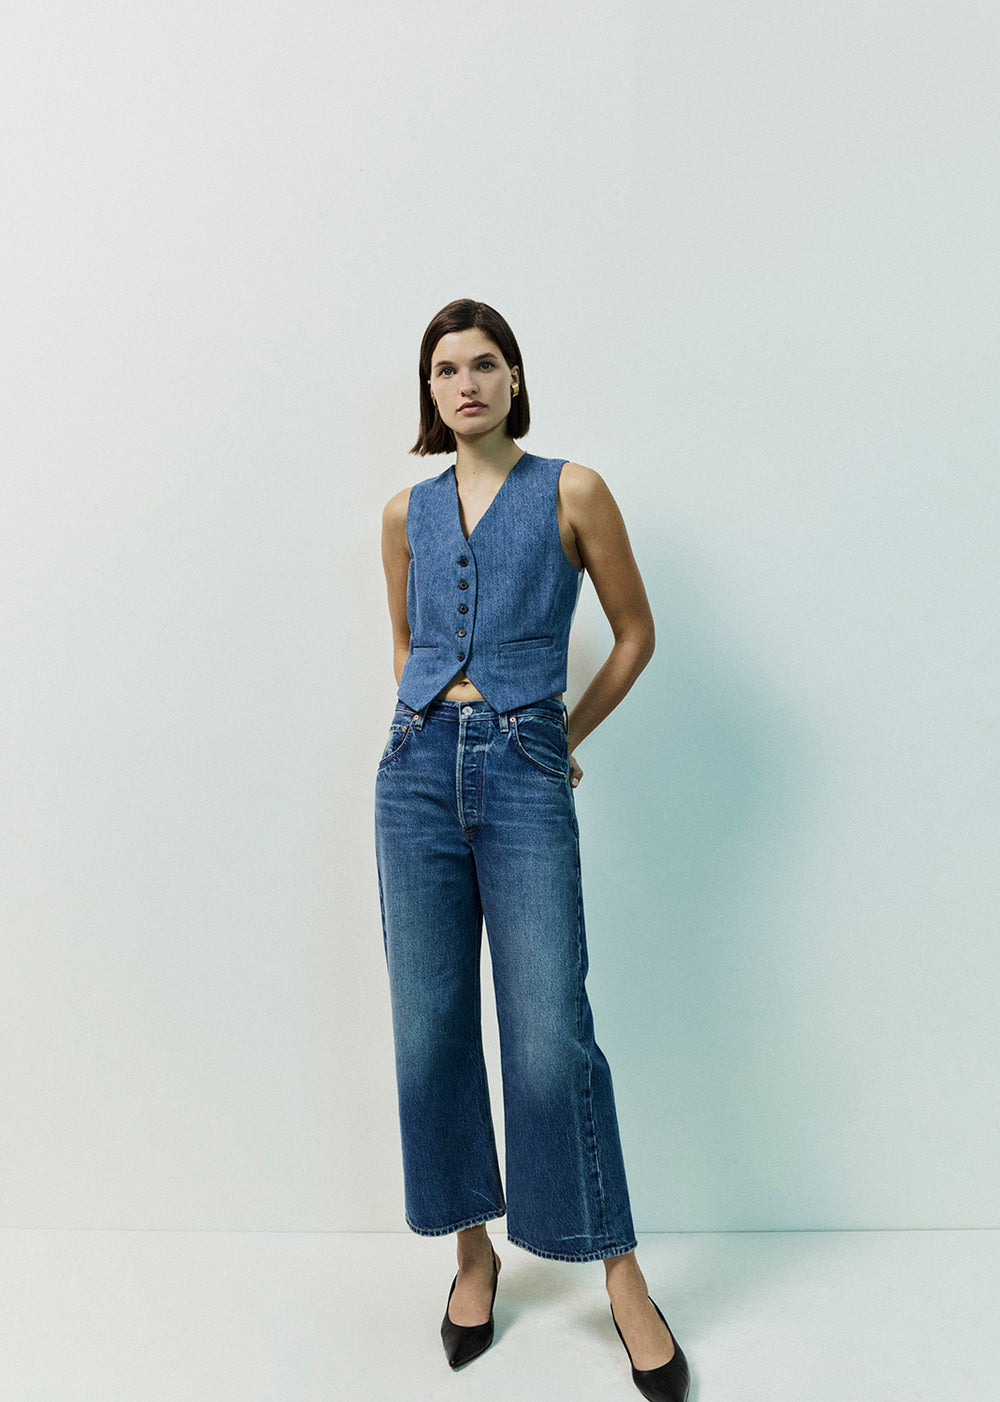 Jeans Gaucho in OasisCitizens of Humanity - Anita Hass